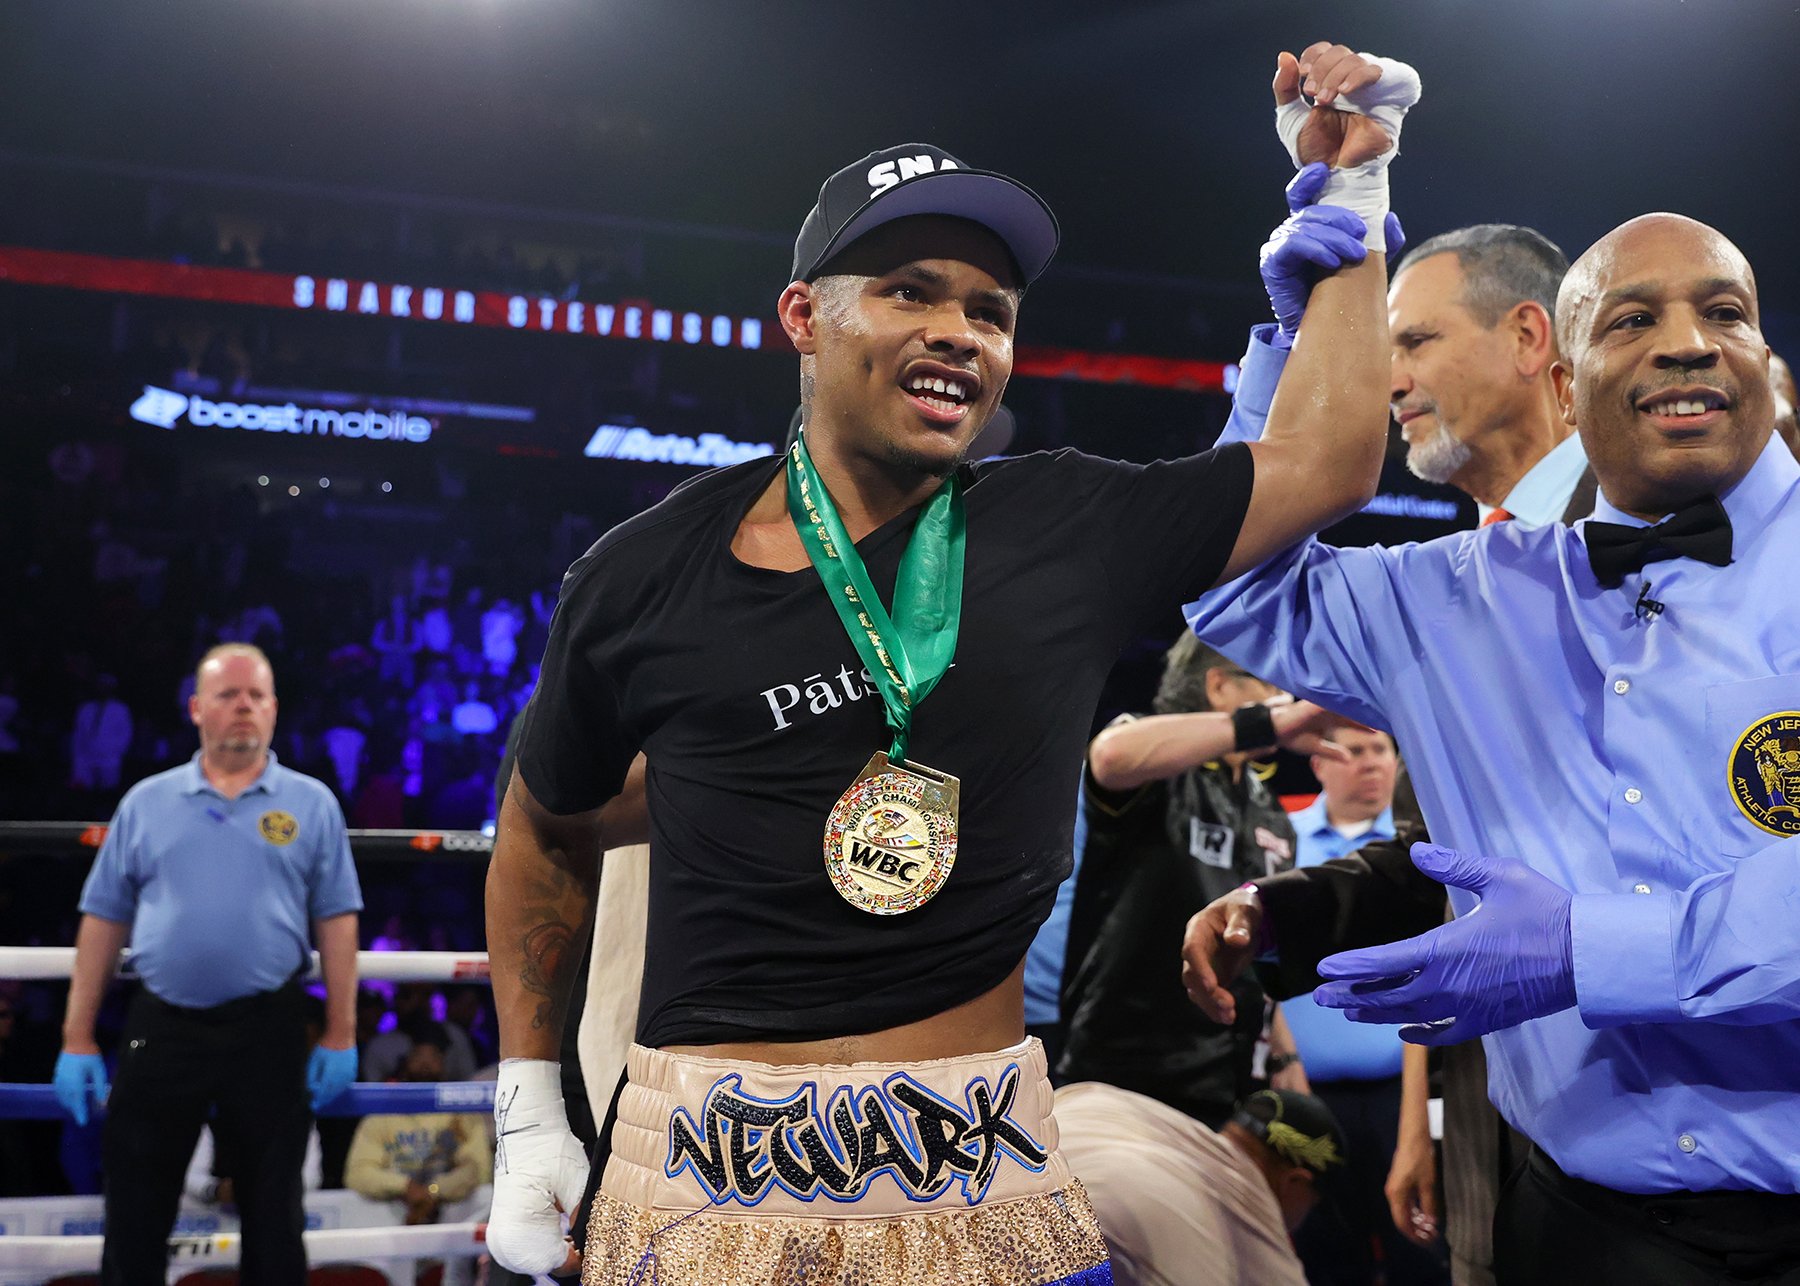 Shakur Stevenson vows to ‘smoke’ Devin Haney, make it look easy when they meet